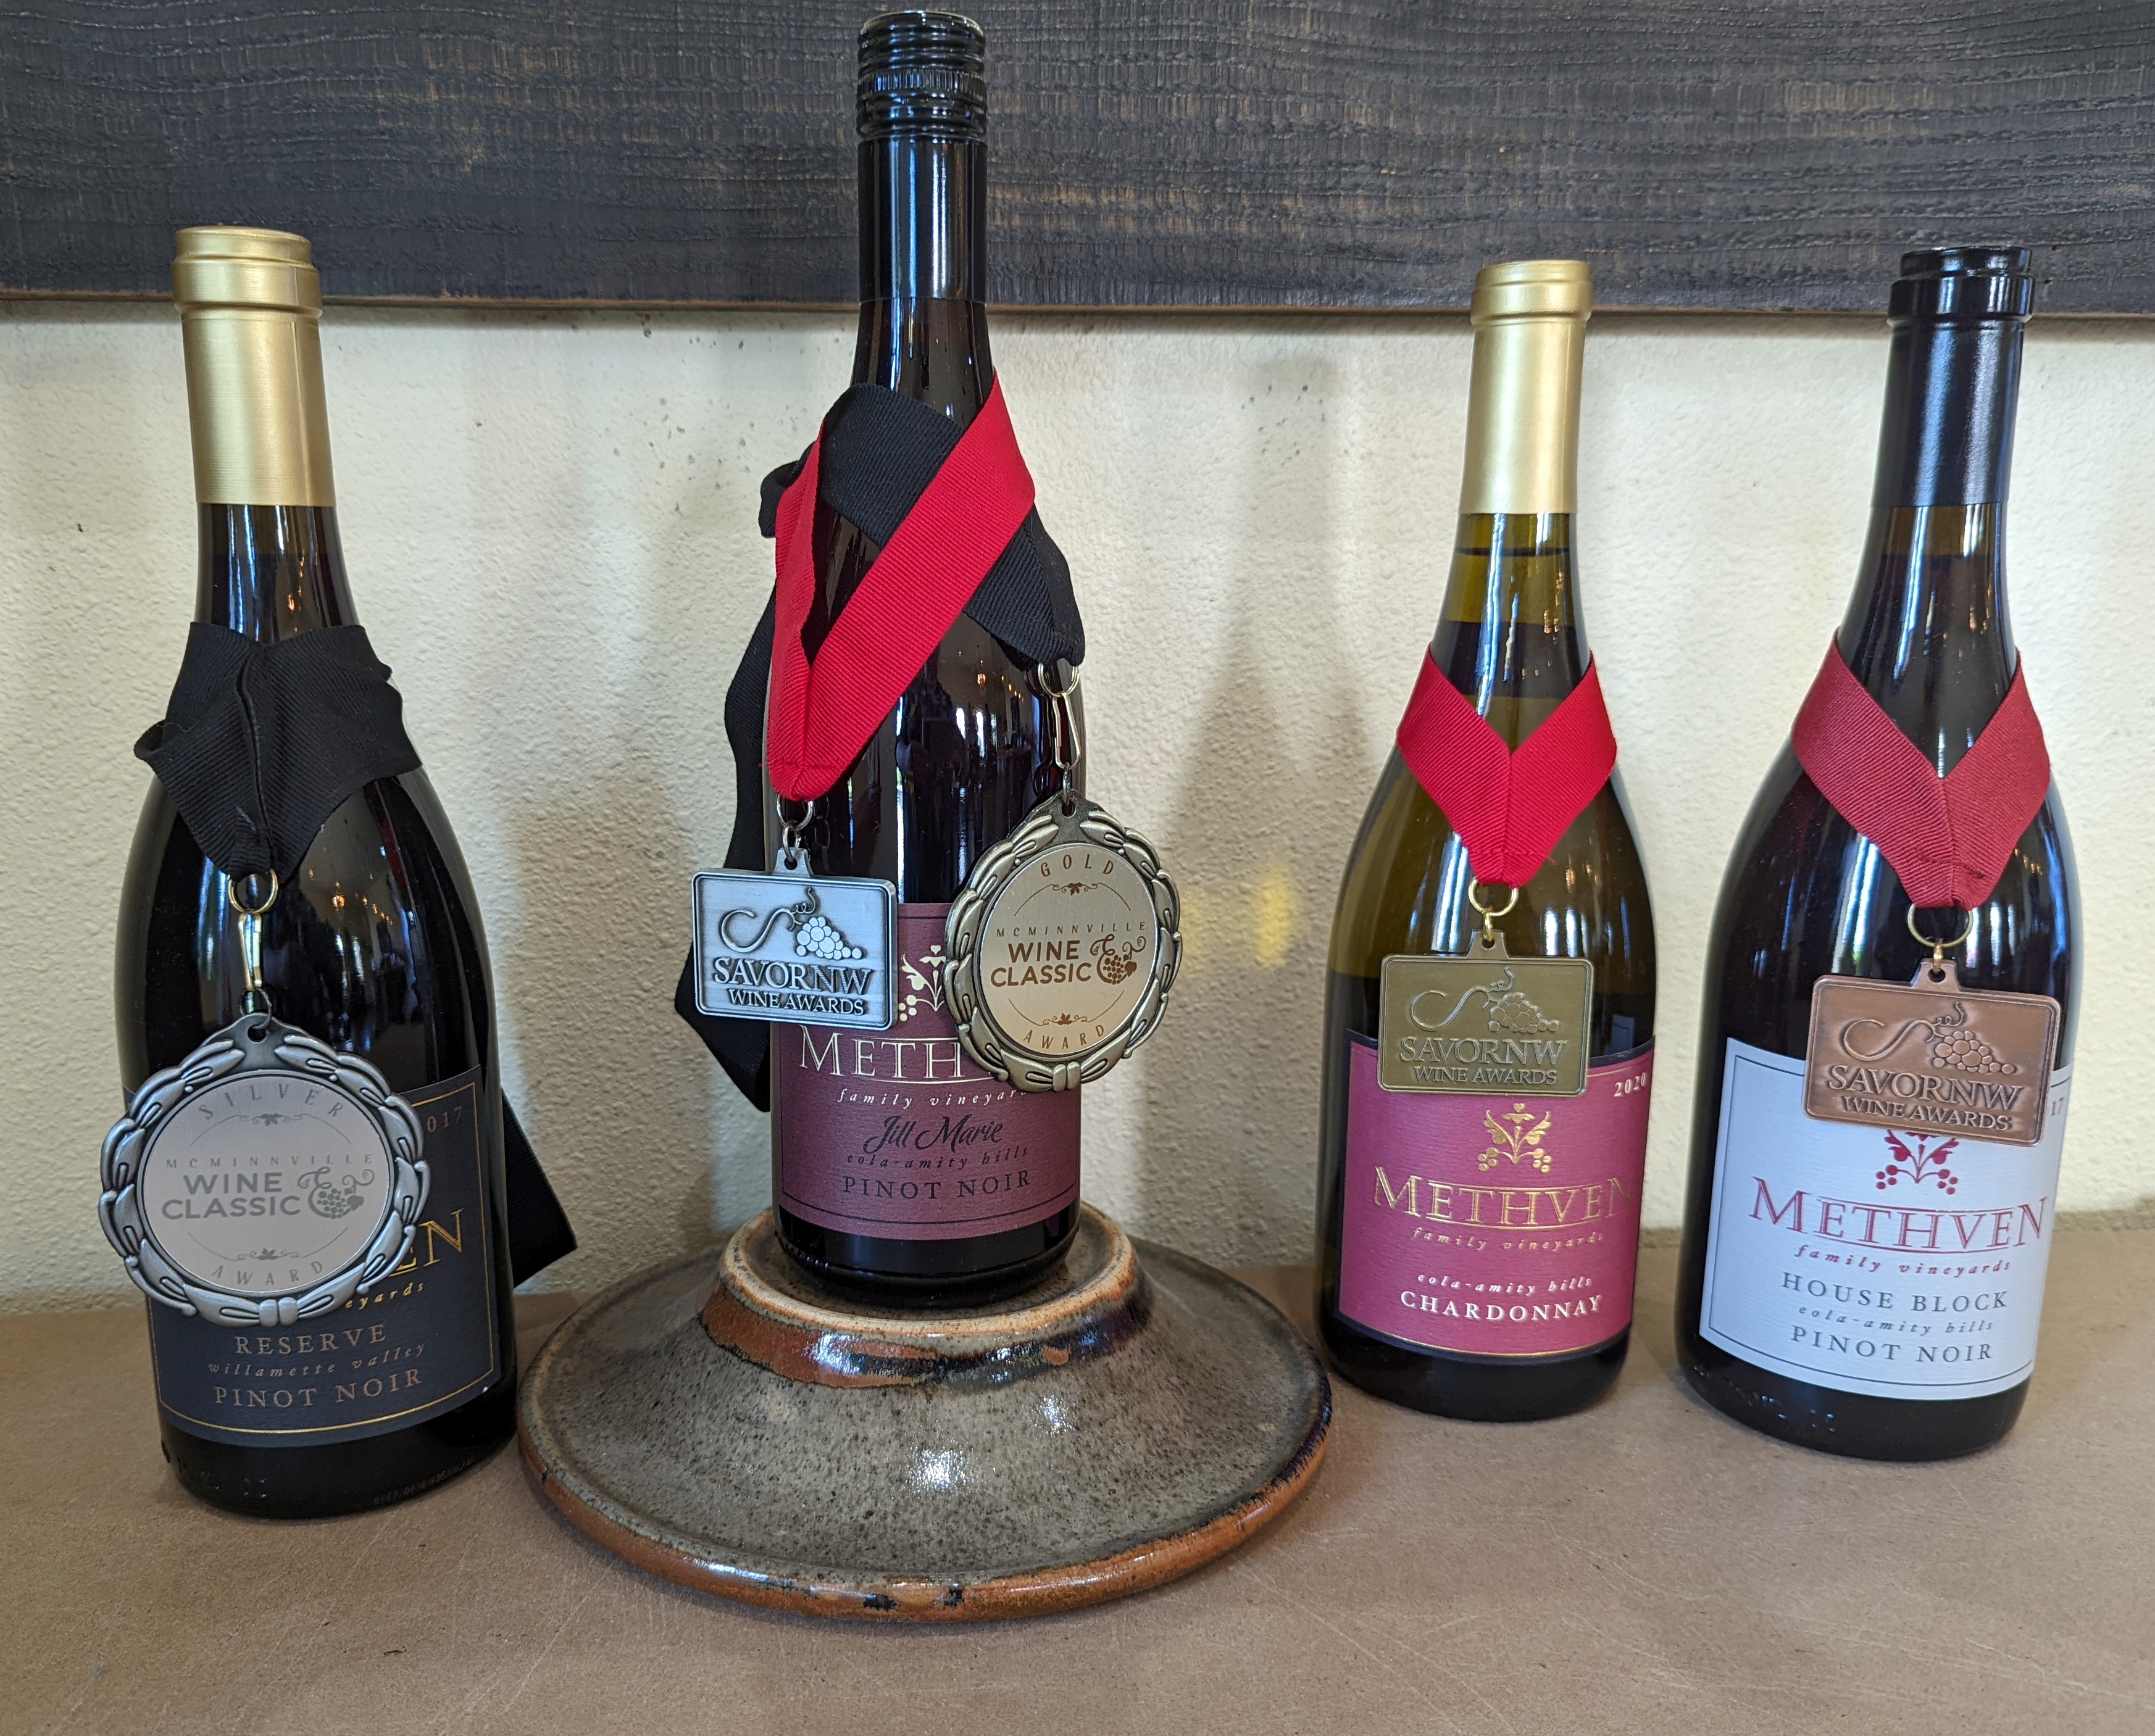 A display of our award-winning wine bottles with their respective medals on the bottle necks. From left to right: 2017 Reserve Pinot Noir, 2017 Jill Marie Pinot Noir, 2020 Chardonnay, and 2017 House Block Pinot Noir.